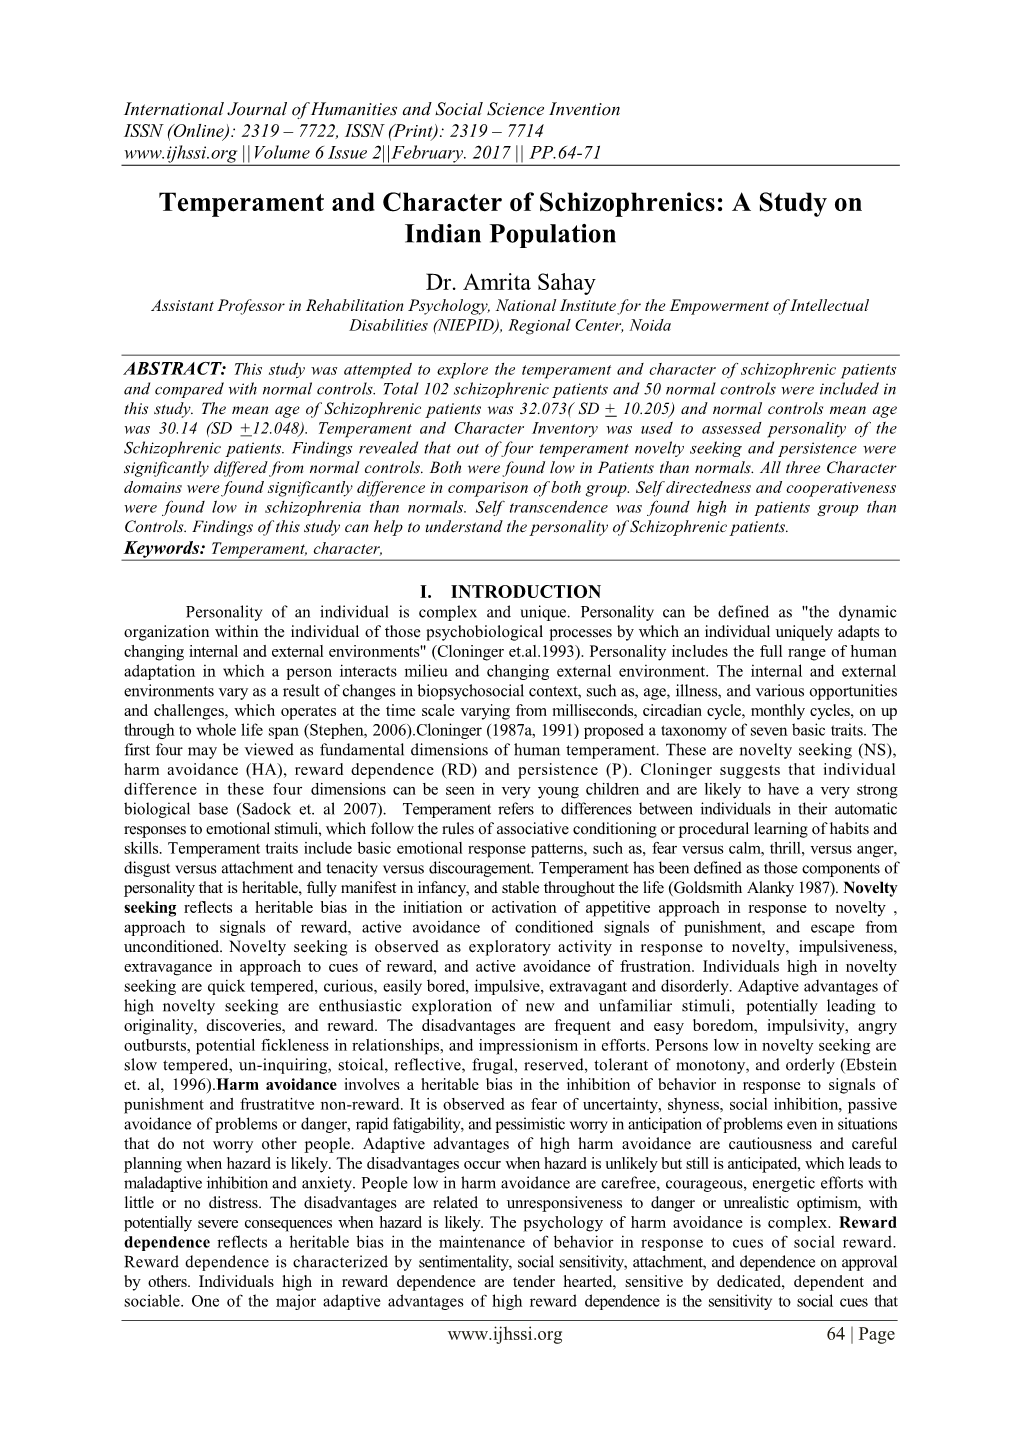 Temperament and Character of Schizophrenics: a Study on Indian Population